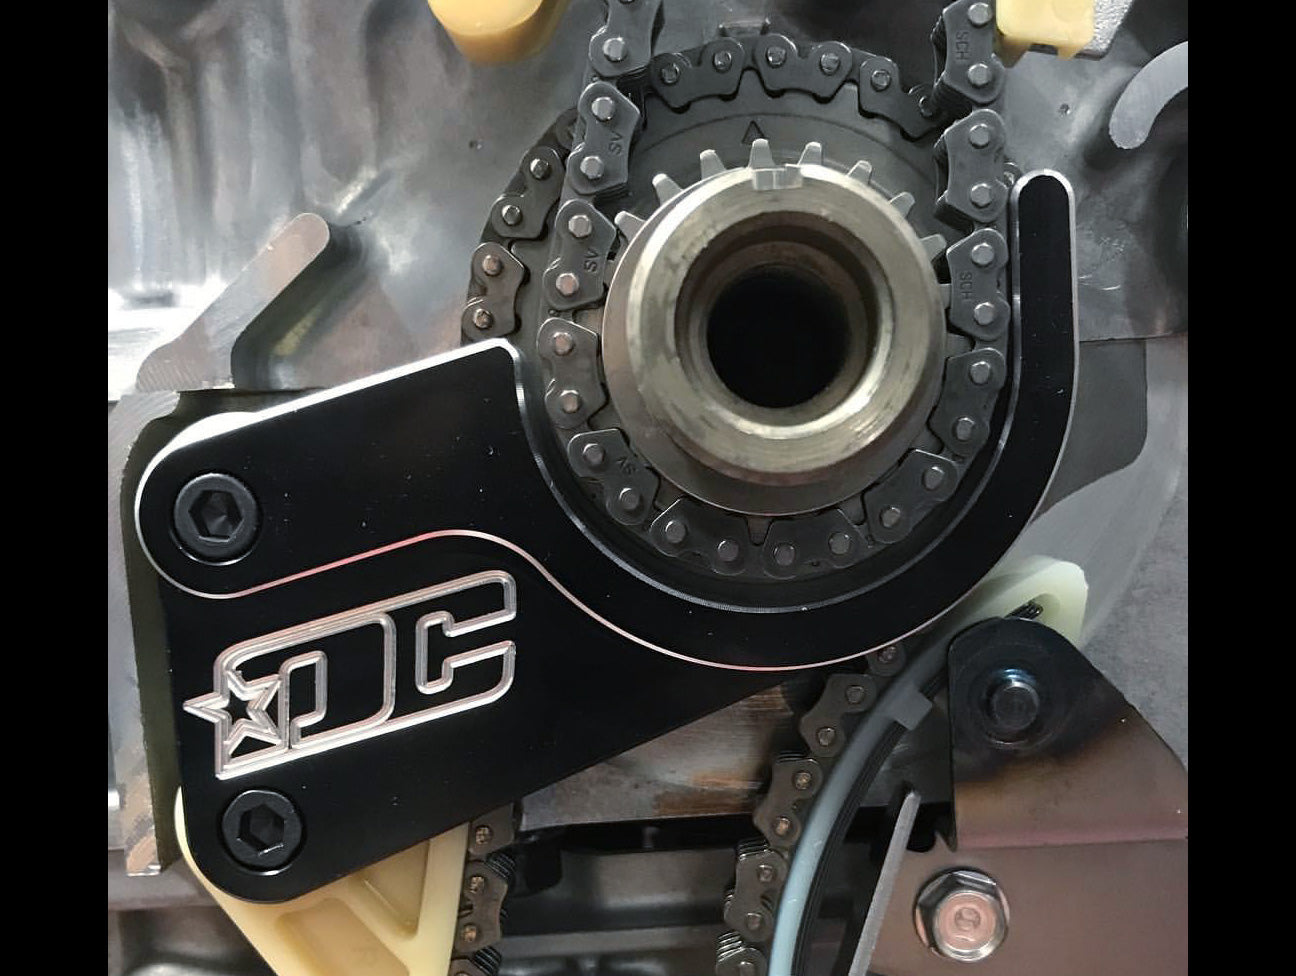 Drag Cartel Lower Timing Chain Guide - K-series